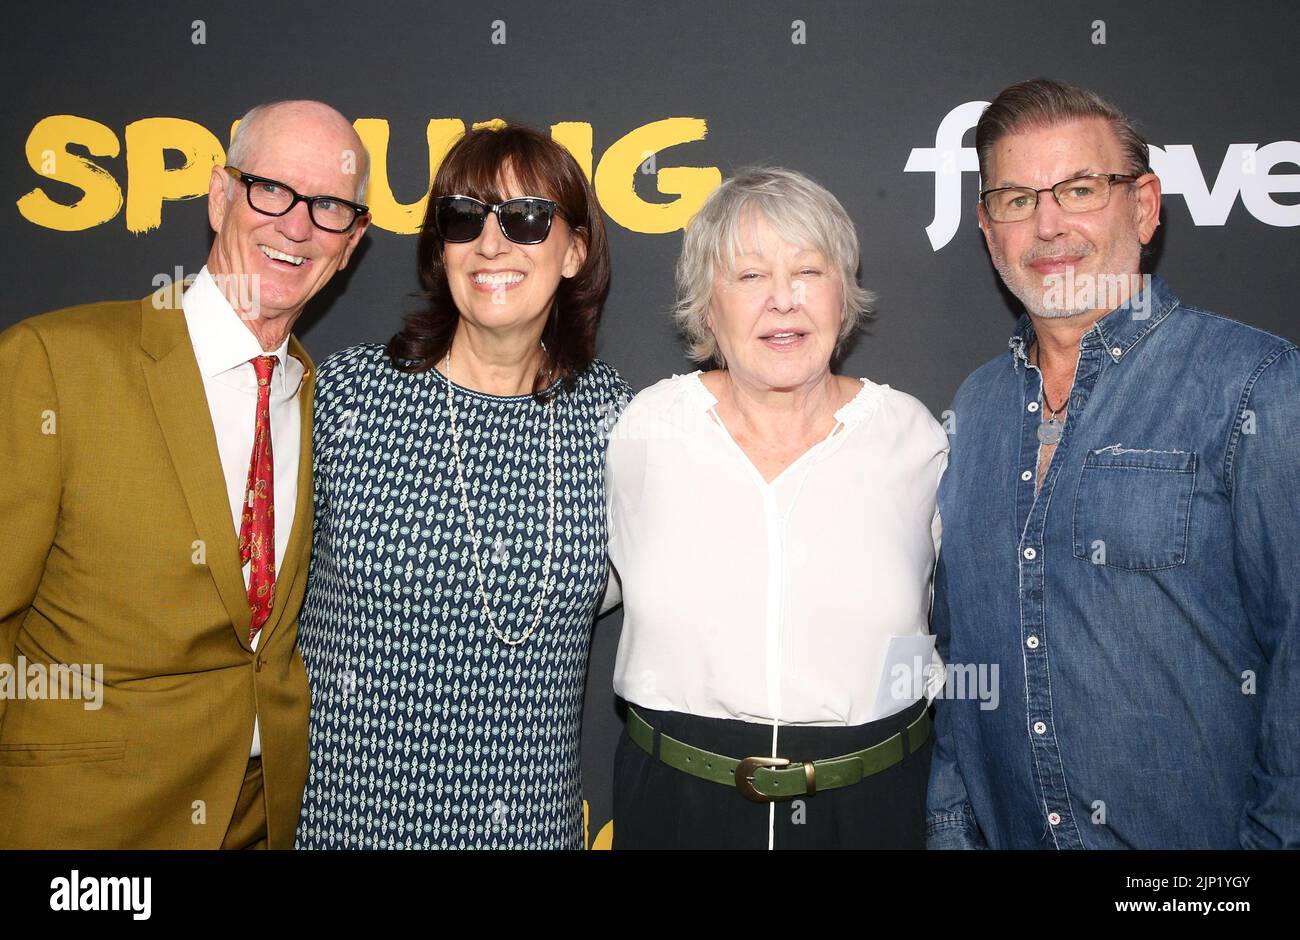 Los Angele, Ca. 14th Aug, 2022. David Wells, Caroline Wells, Susan Ruttan at the red carpet premiere of Amazon Freevee's Sprung at the Hollywood Forever Cemetery in Los Angeles, California on August 14, 2022. Credit: Faye Sadou/Media Punch/Alamy Live News Stock Photo